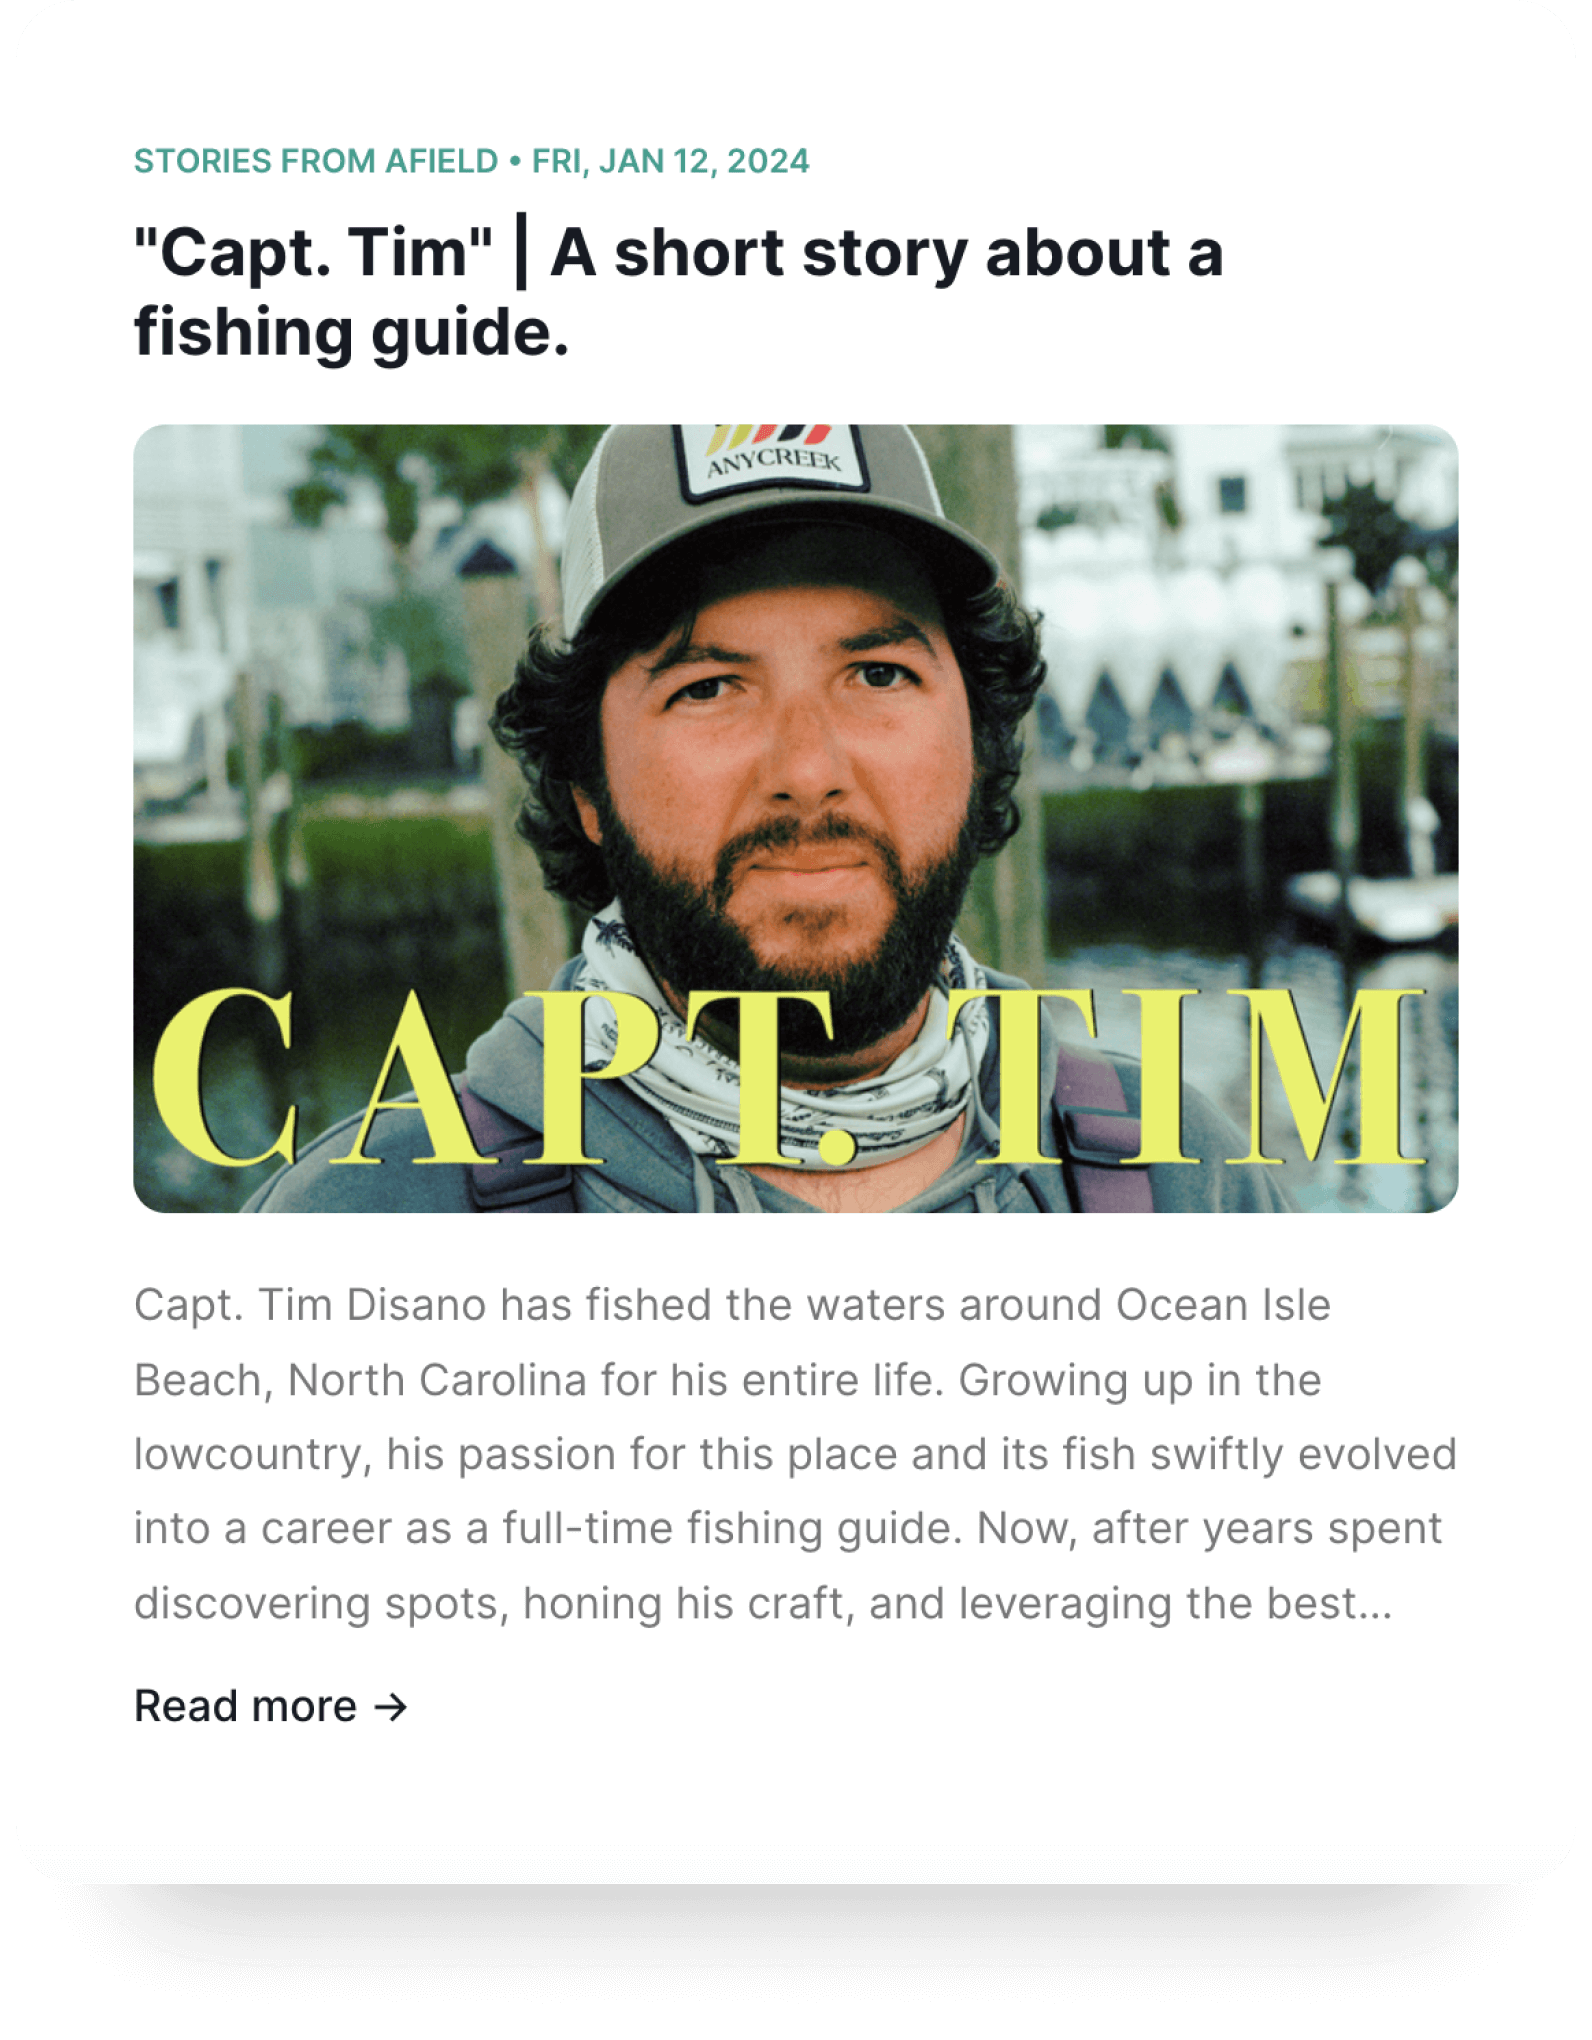 An article titled "Capt. Tim | A short story about a fishing guide." featuring a photo of Capt. Tim Disano